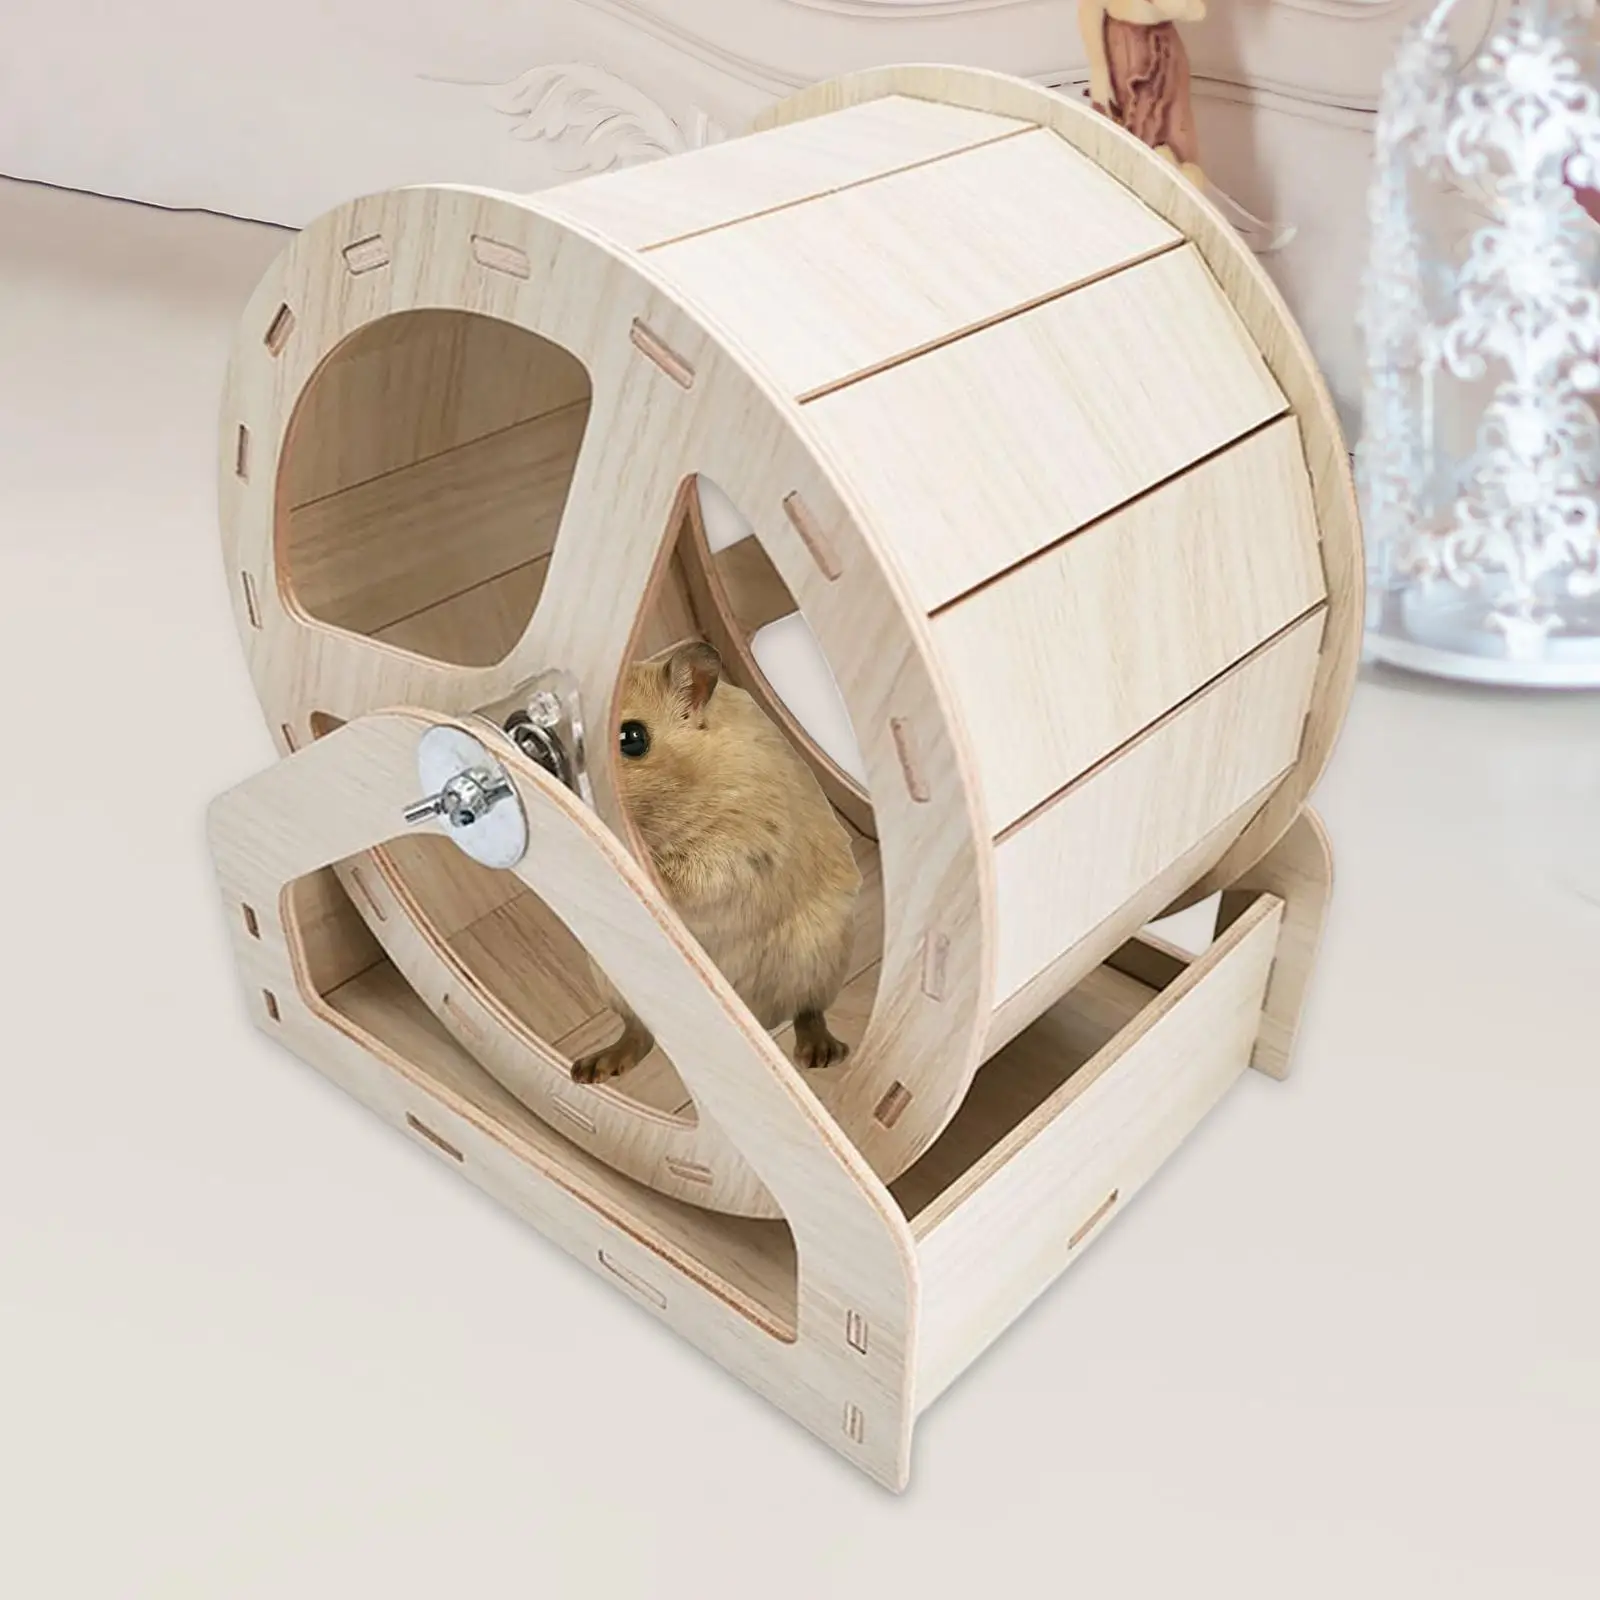 Quiet Hamster Running Wheels Exercise Toys Gerbils Small Chinchilla Mouse Indoor Round Wood Hamster Exercise Wheel Pet Supplies